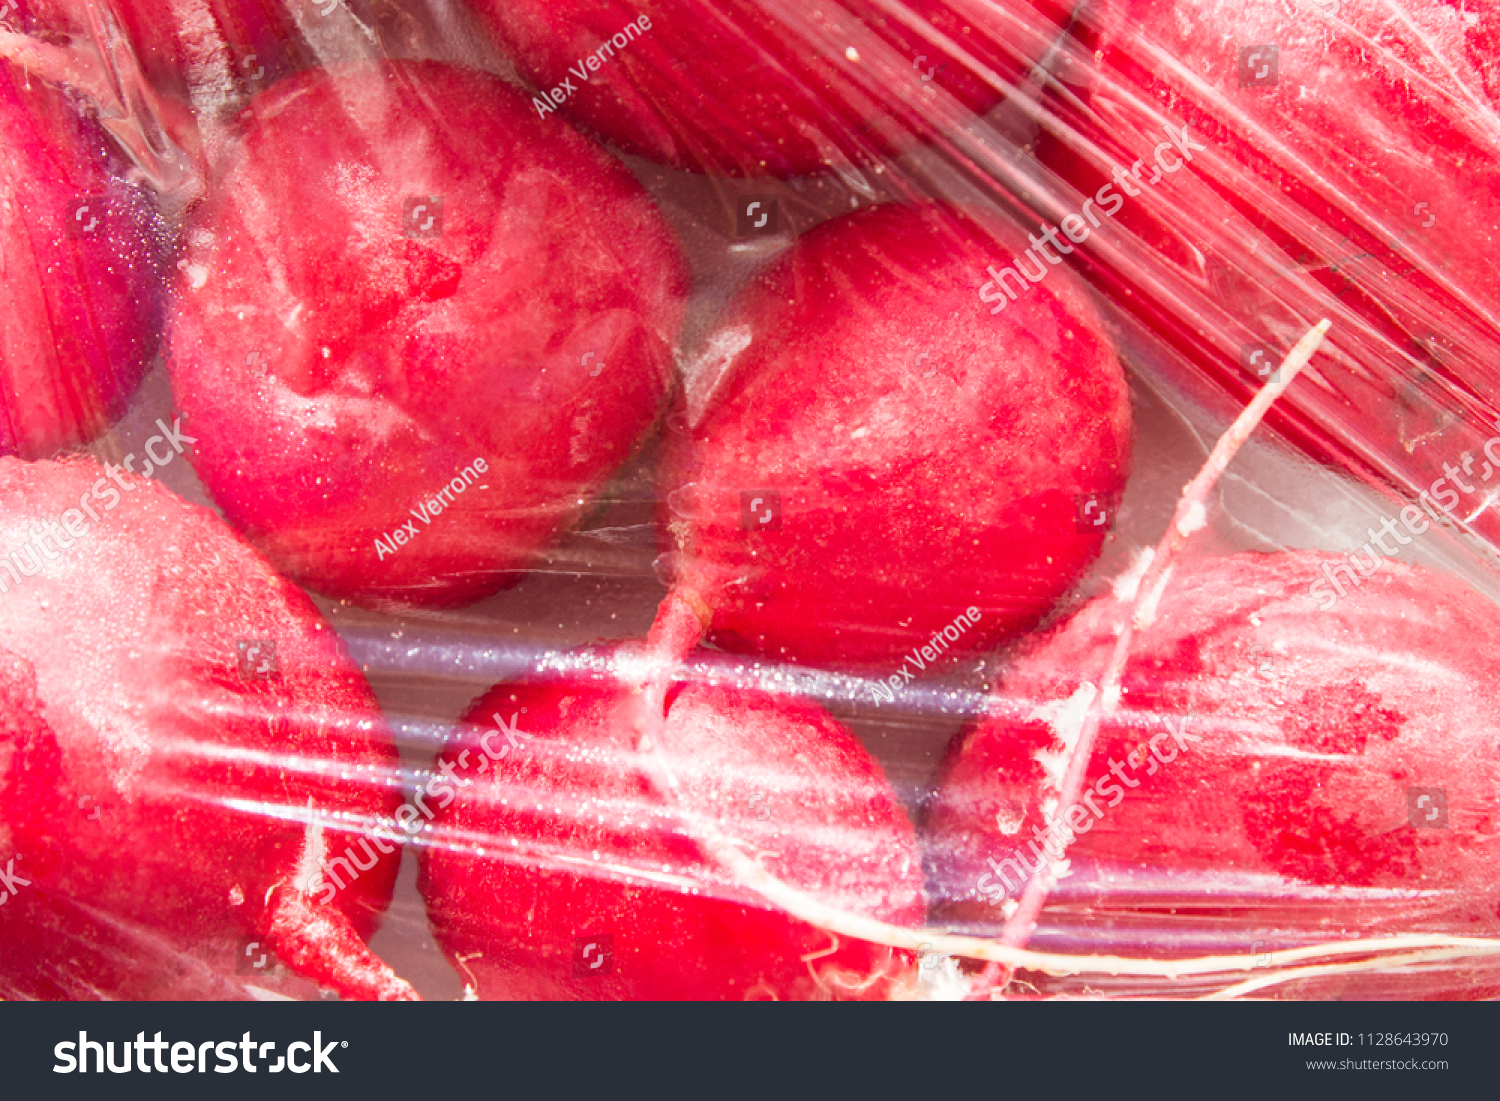 Download Red Radish Packed Plastic Bag Stock Photo Edit Now 1128643970 PSD Mockup Templates